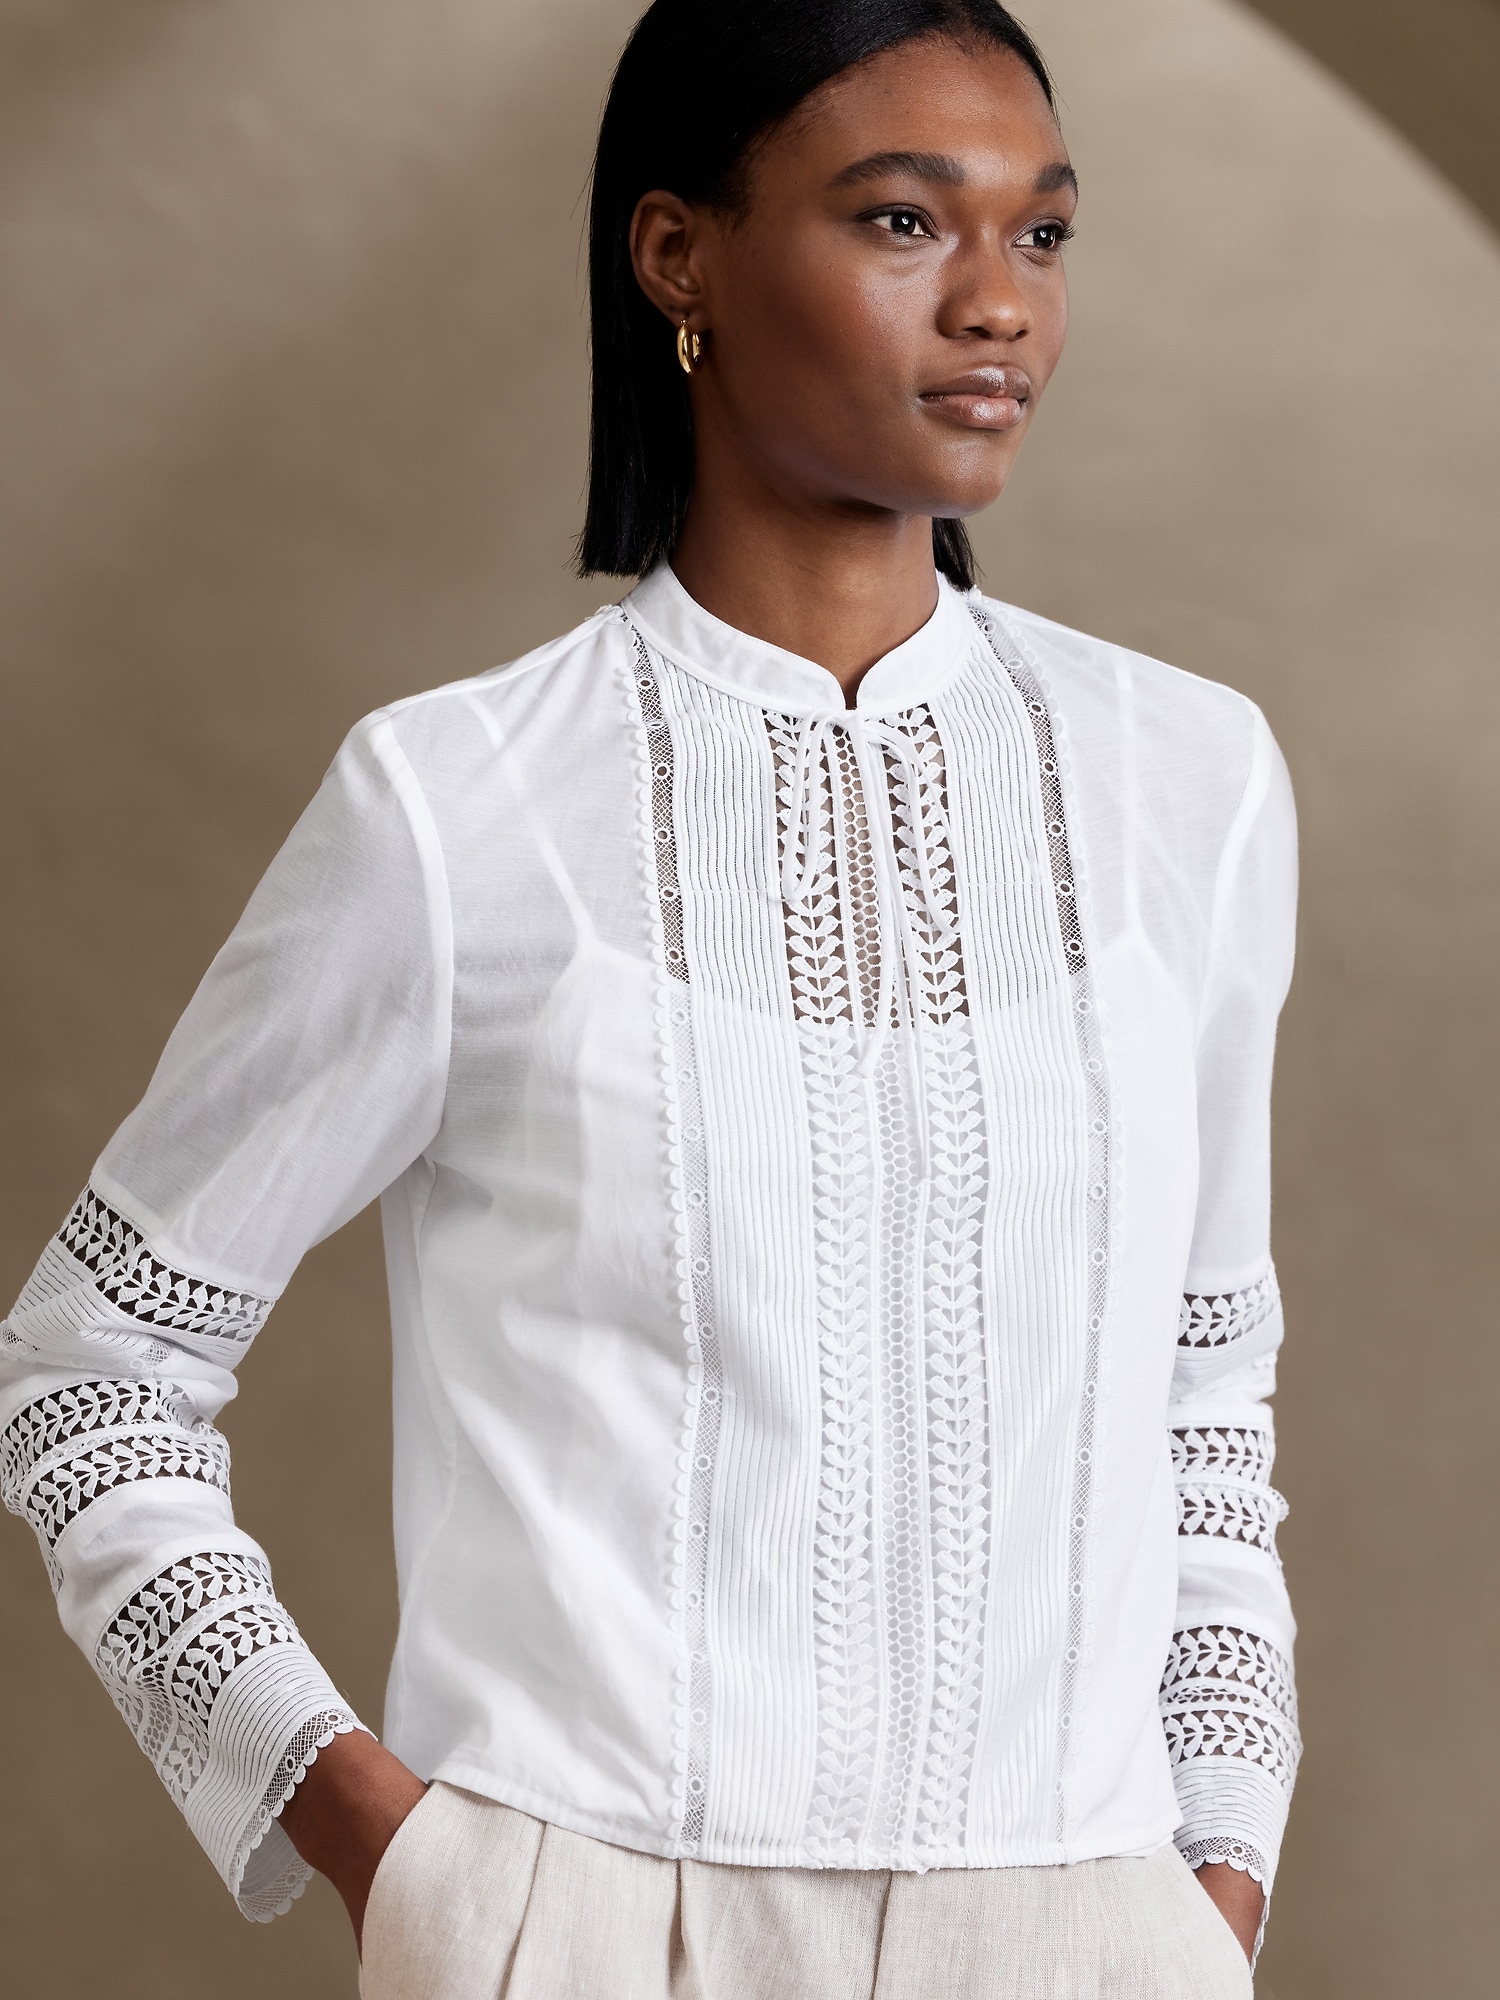 Lace-inset Blouse with Collar - White - Ladies